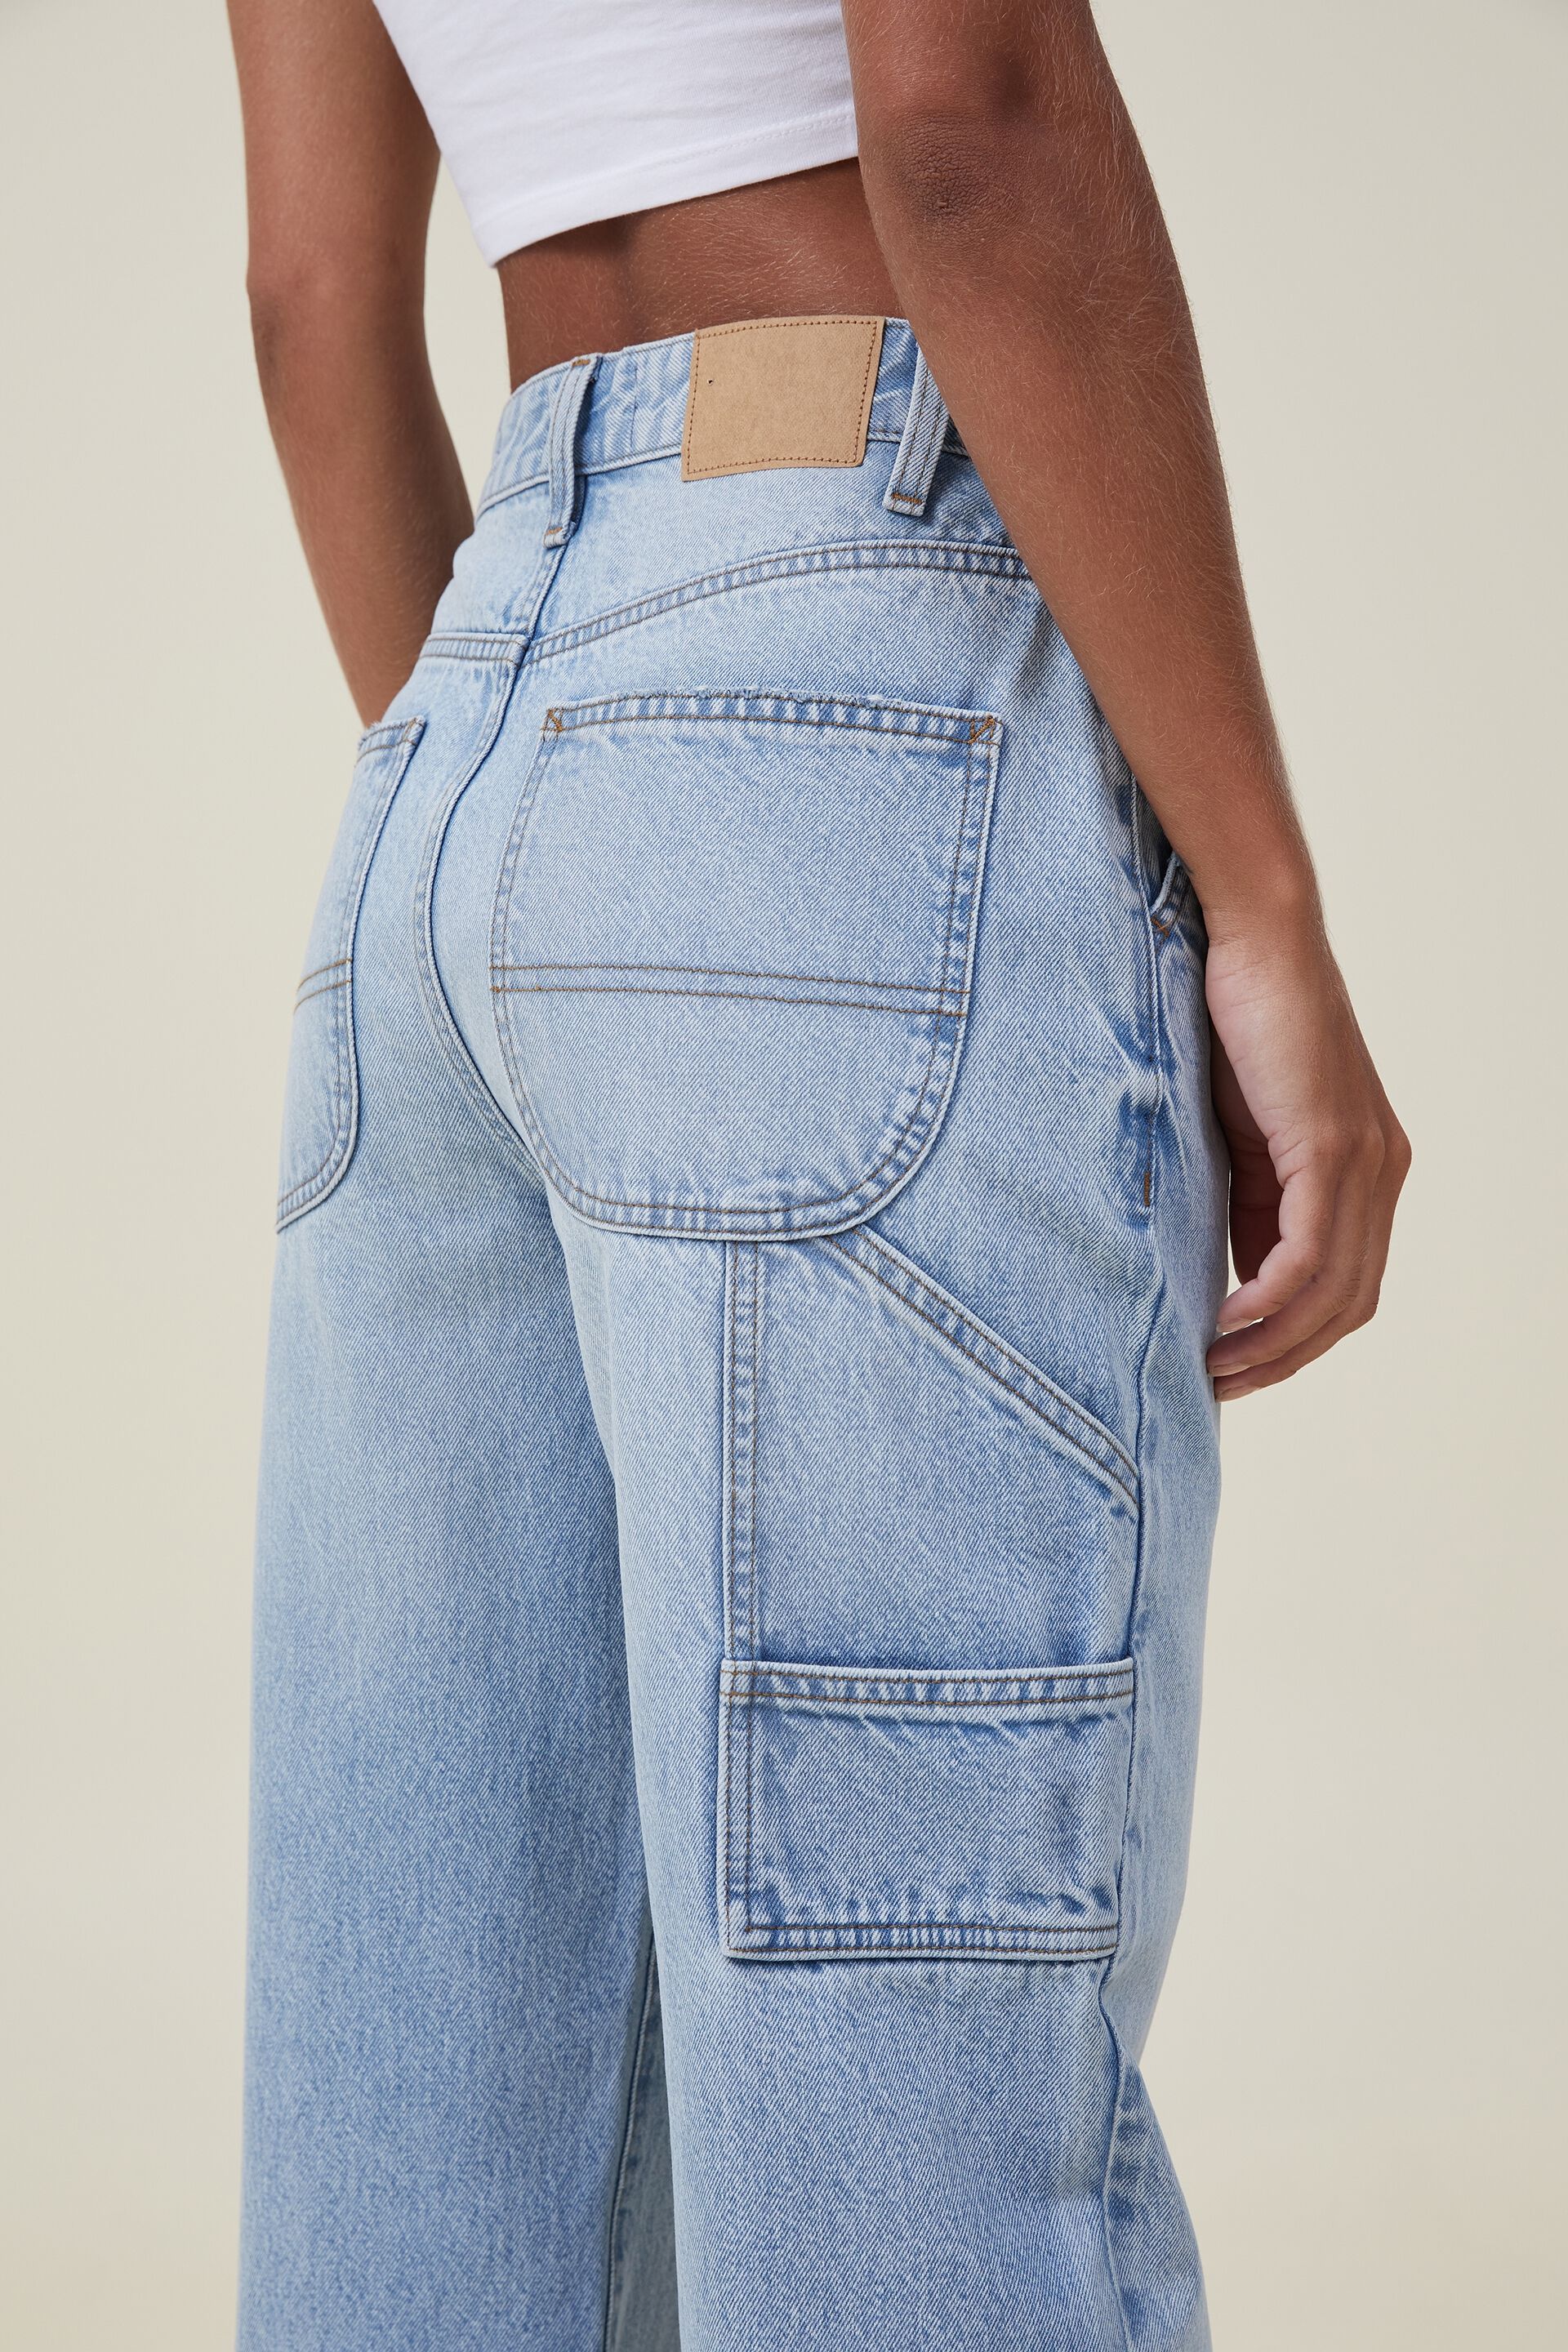 High Waisted Baggy Mom Jeans For Leisure And Style Perfect For Mom,  Boyfriends, And More Style #230928 From Huo01, $18.67 | DHgate.Com